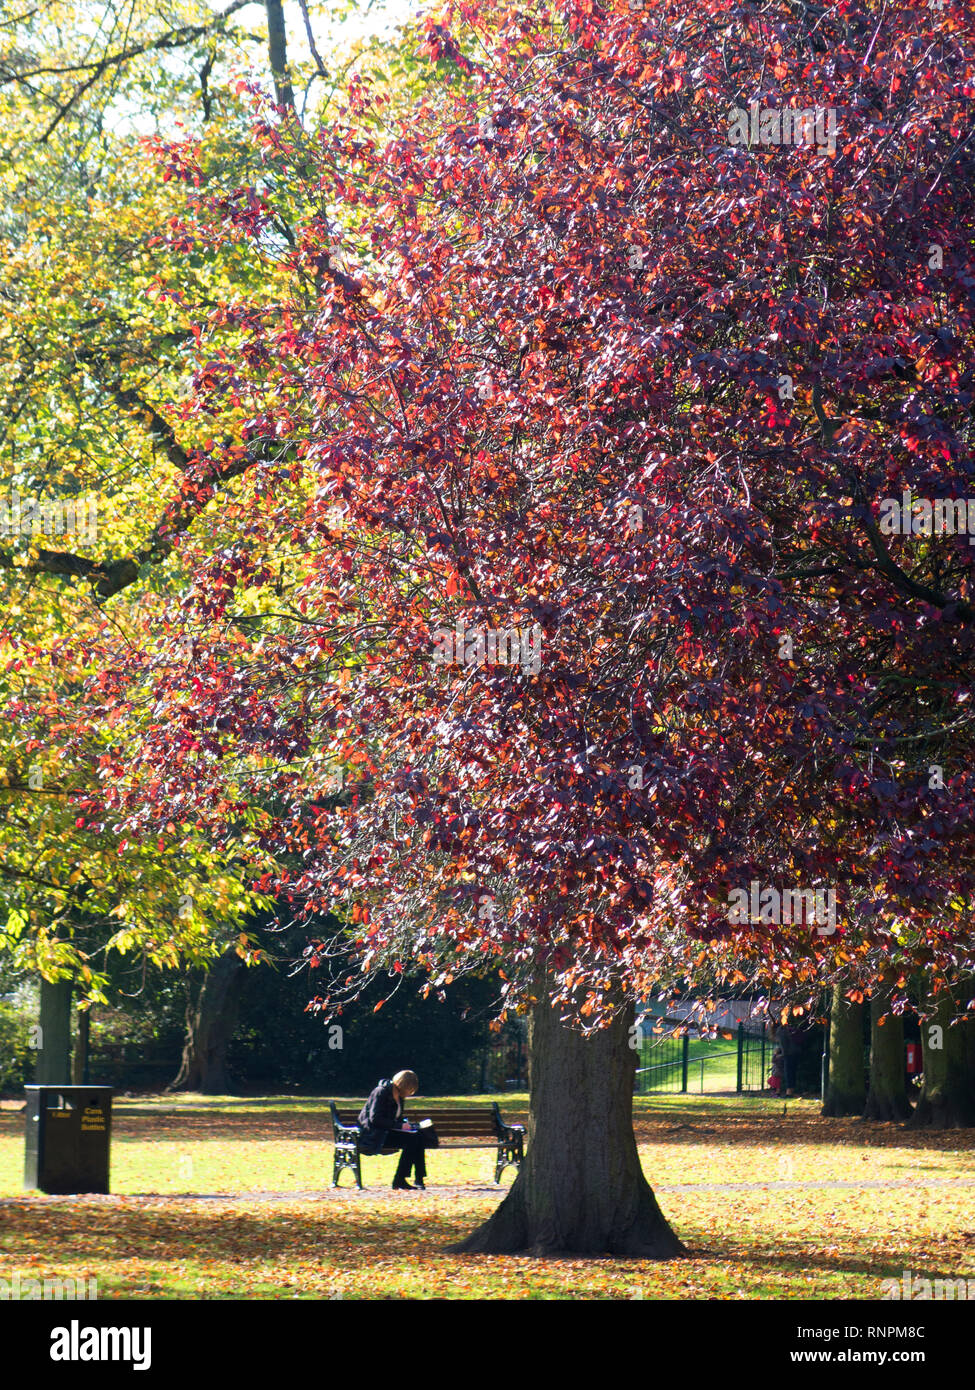 Sitting in the park in autumn Stock Photo